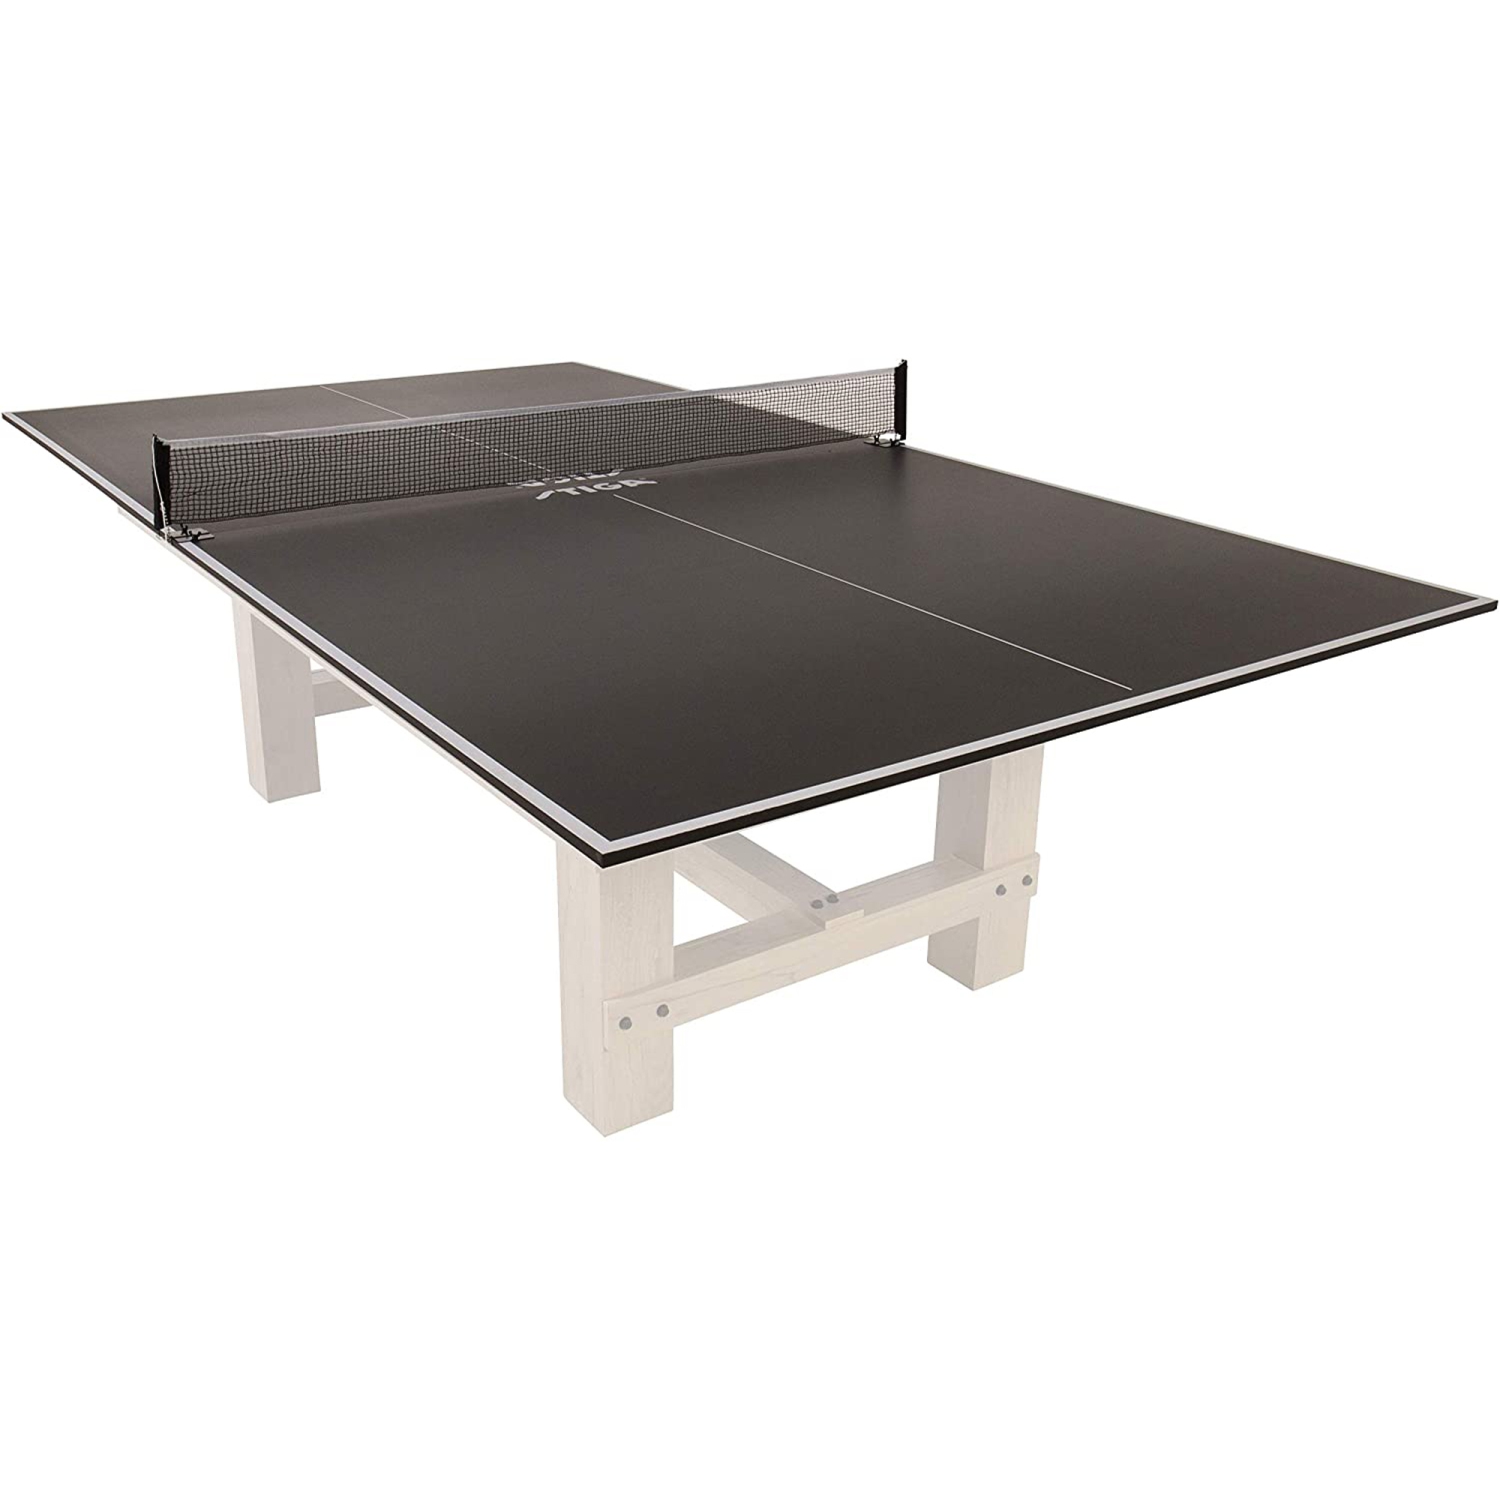 Escalade Stiga Premium 2-in-1 Top Table Tennis /Ping Pong and Pool/Billiards Table